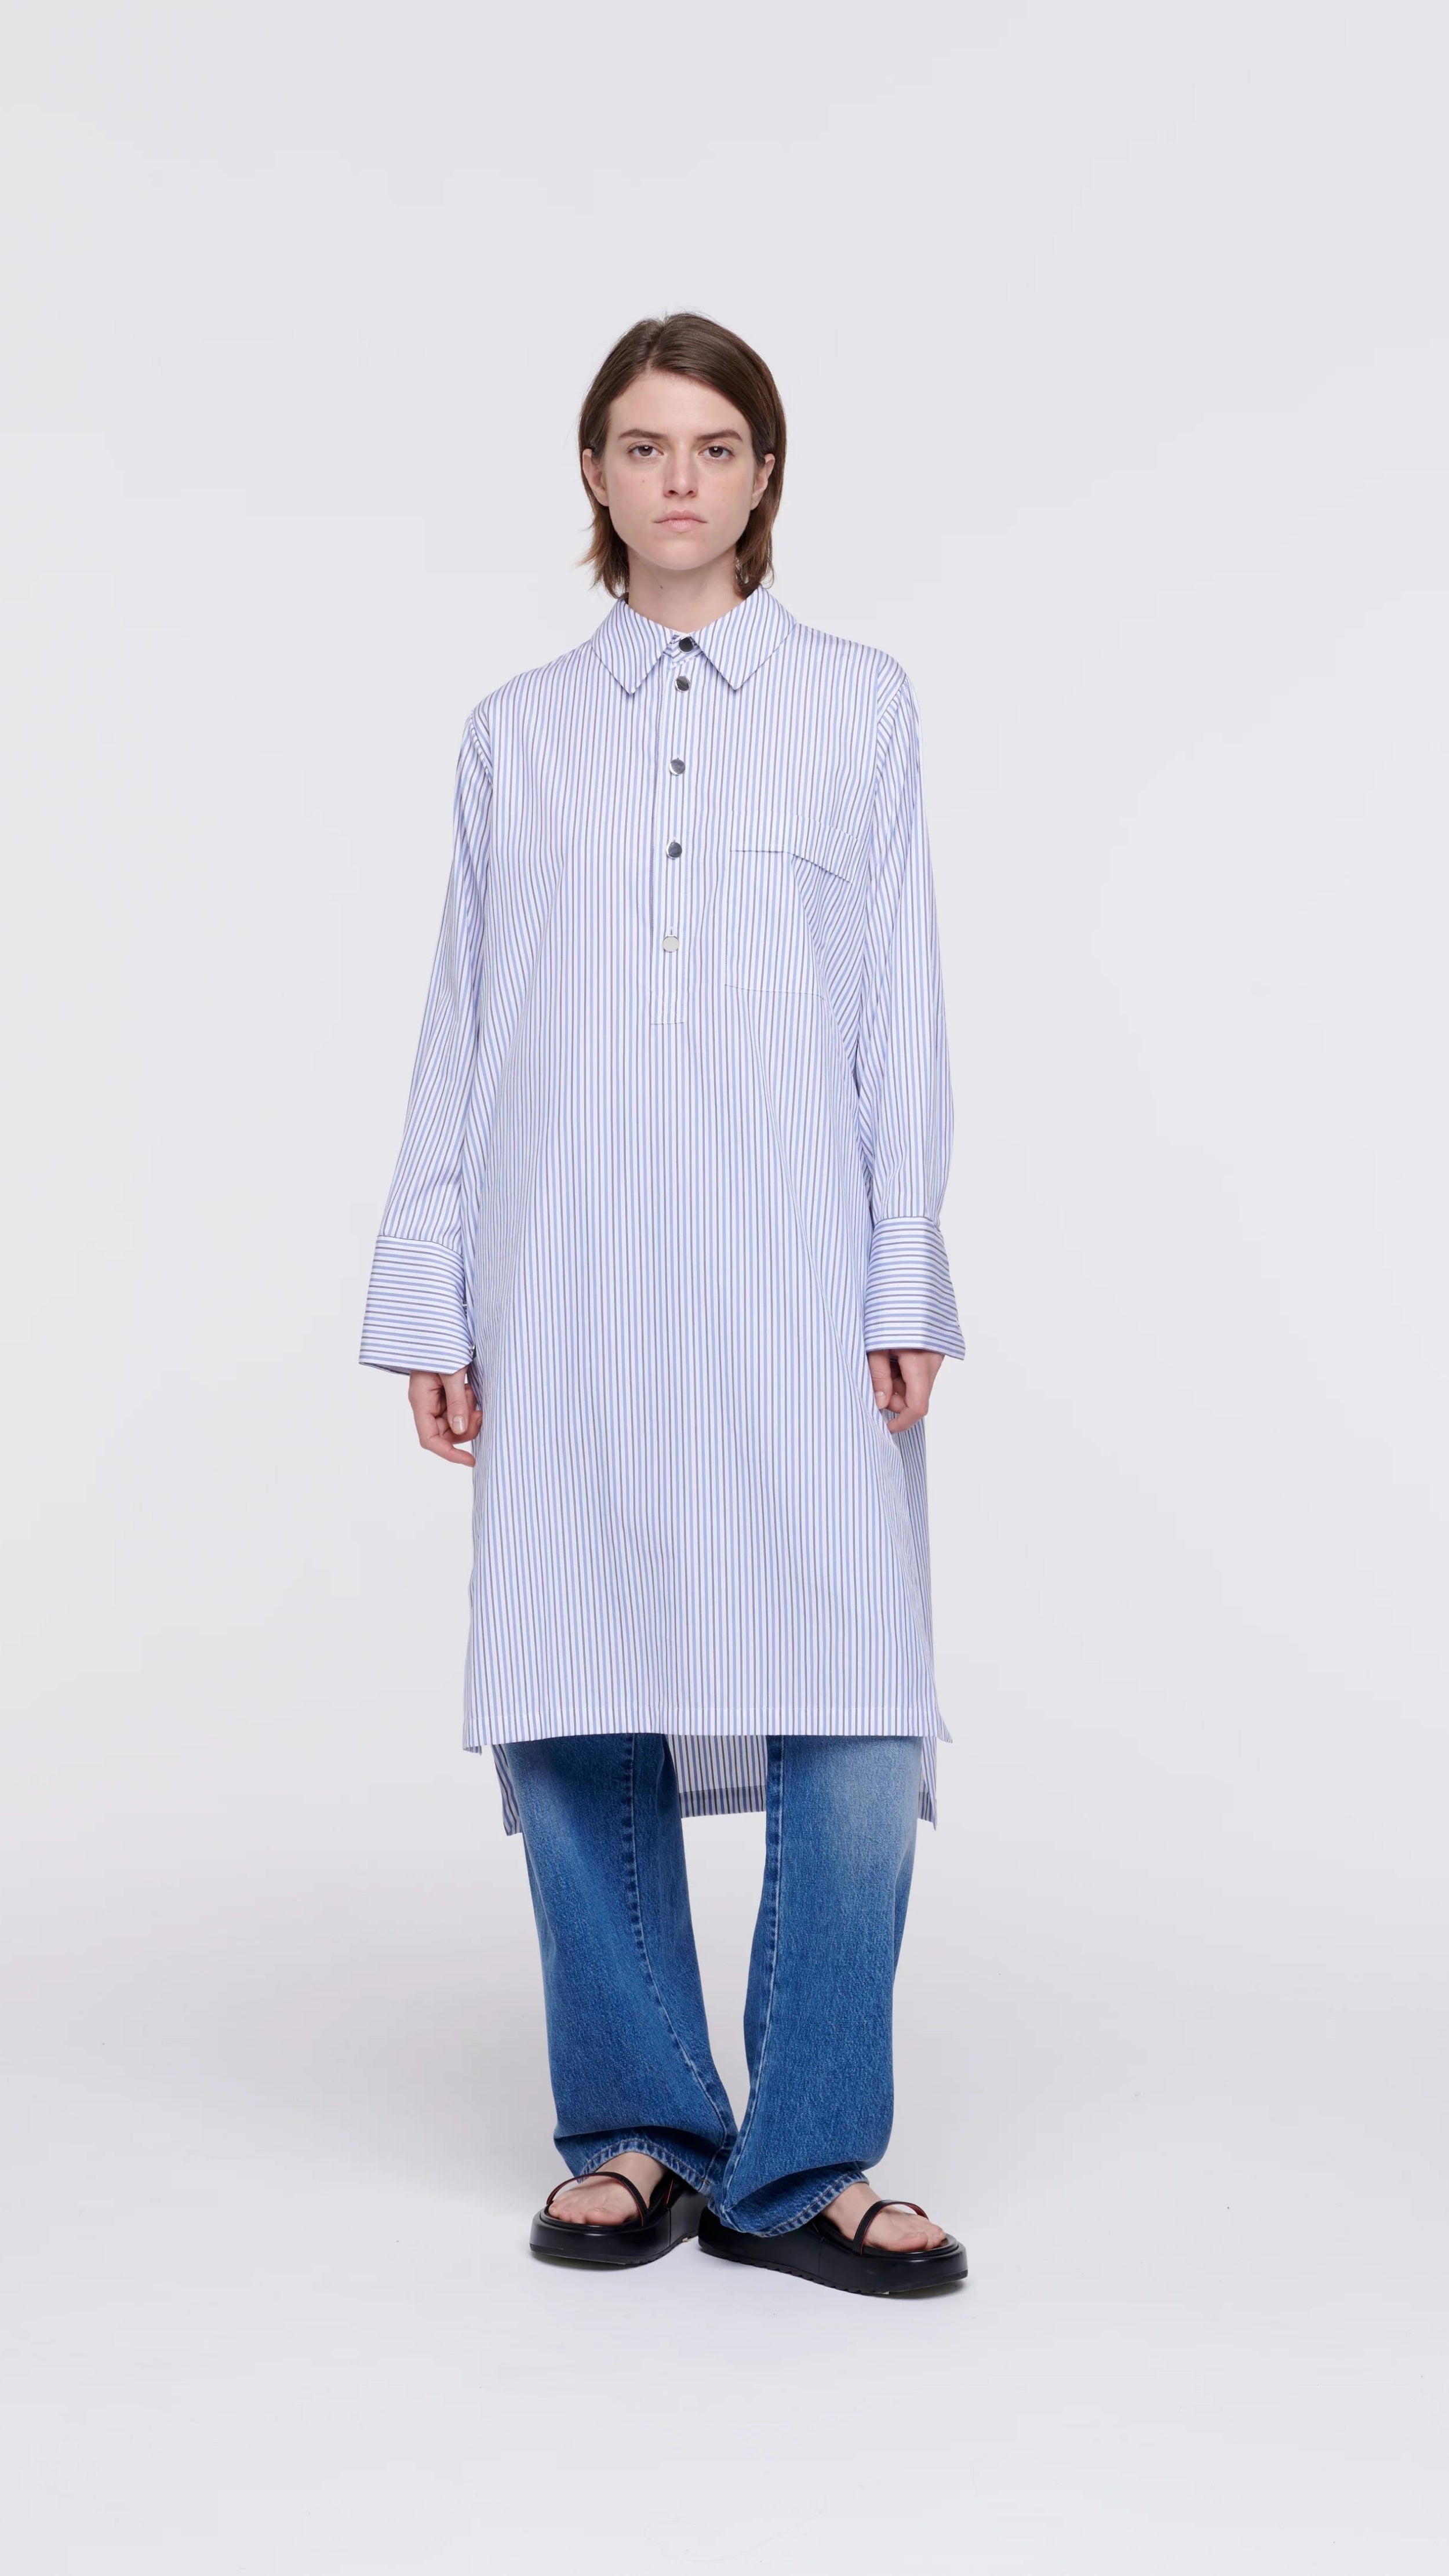 Plan C Striped Cotton Poplin Shirt Dress Classic yet modern shirt dress made from soft cotton poplin in pale blue and white stripes. It has three silver buttons, a collared neckline, long cuffs, and a breast pocket. It&#39;s designed with a relaxed fit and side pockets. Shown on model facing front